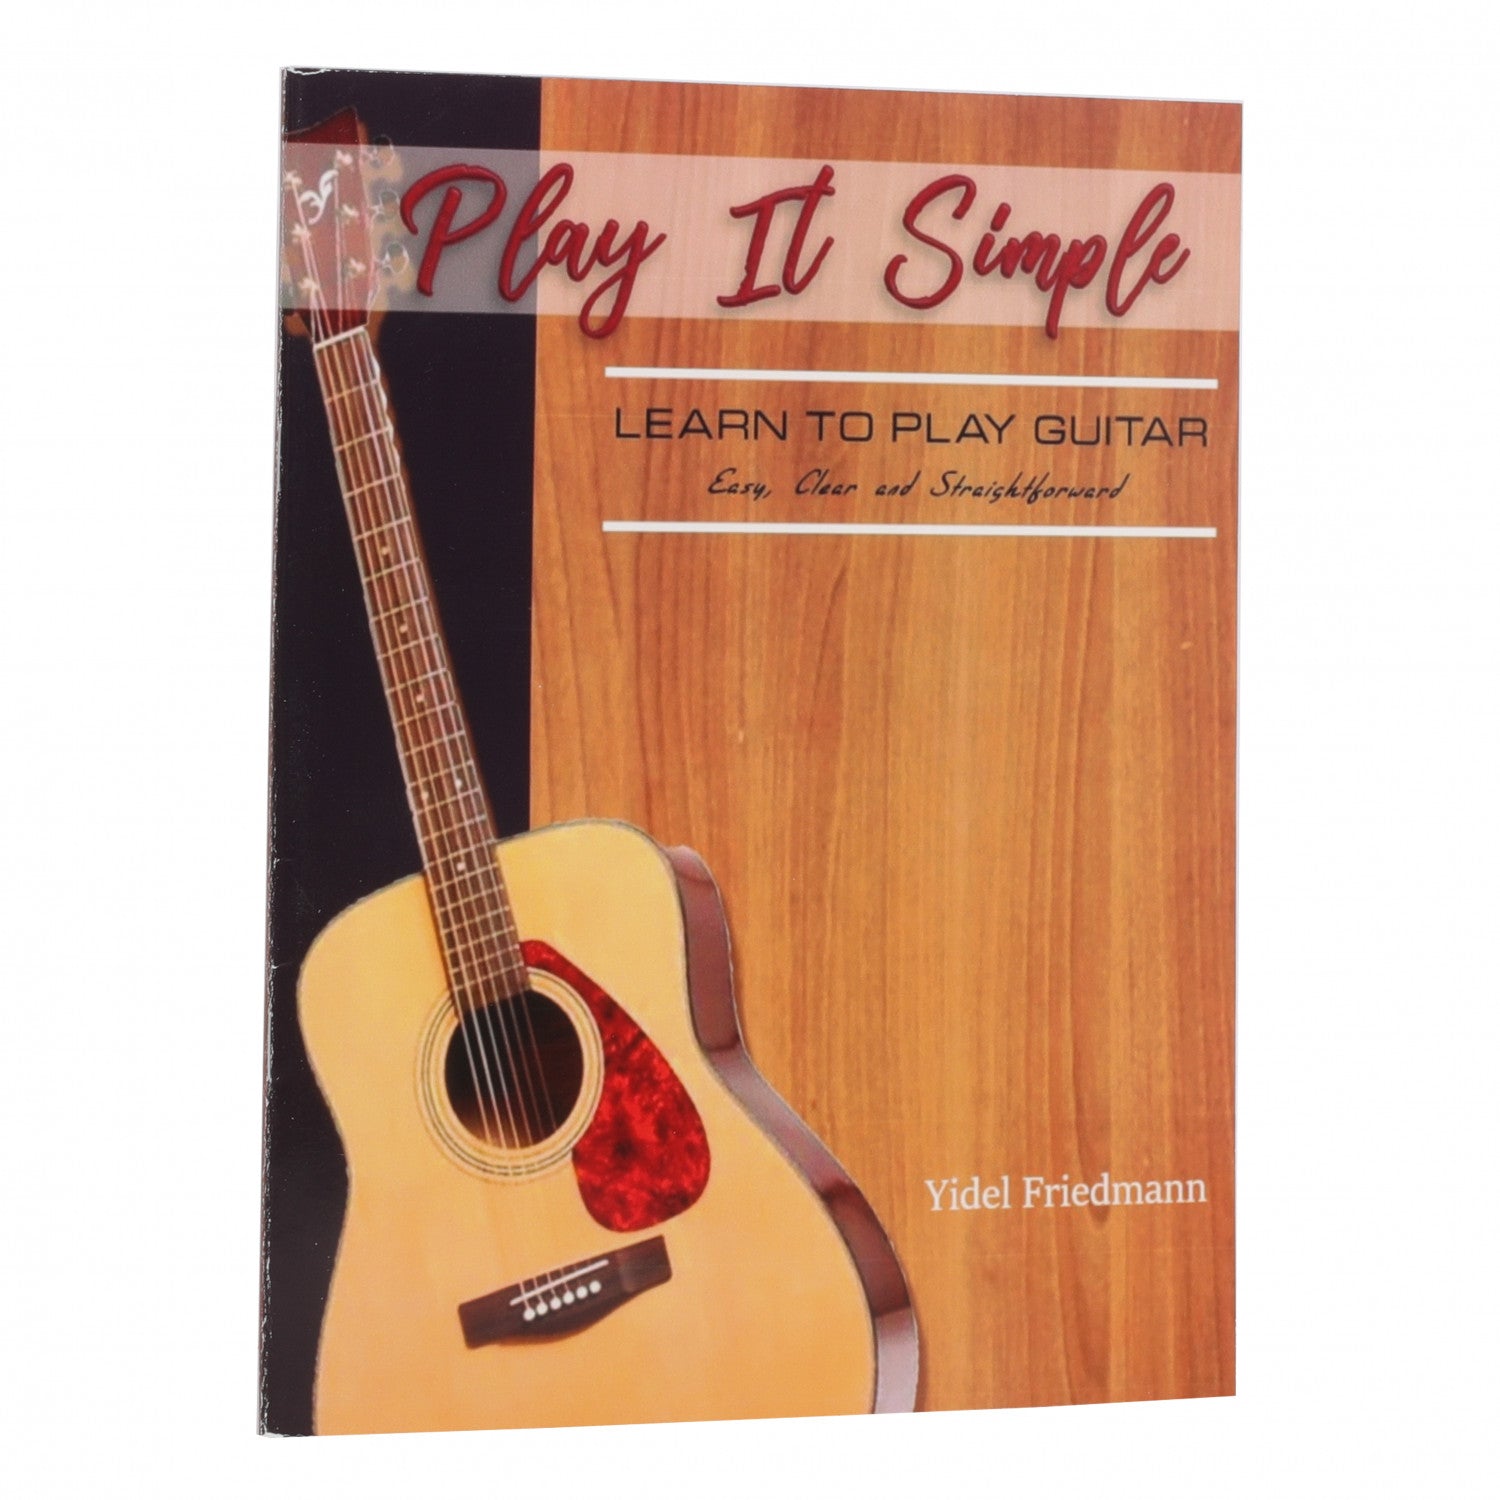 Play It Simple - Learn to Play Guitar (Book)